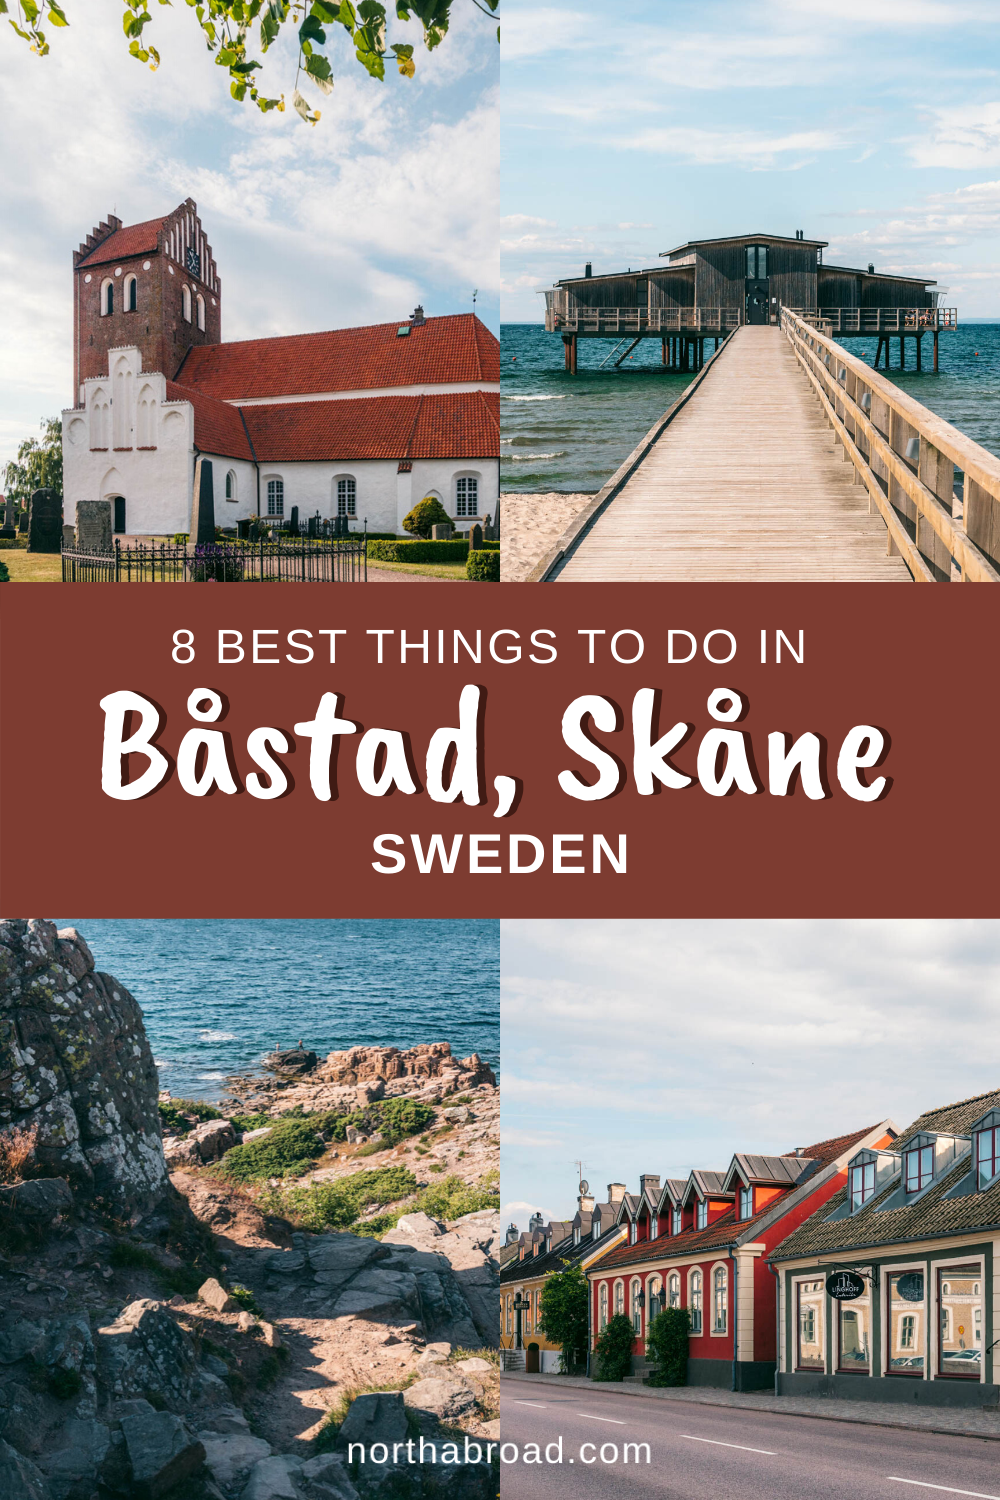 The 8 Best Things to Do in Båstad, Skåne in Southern Sweden